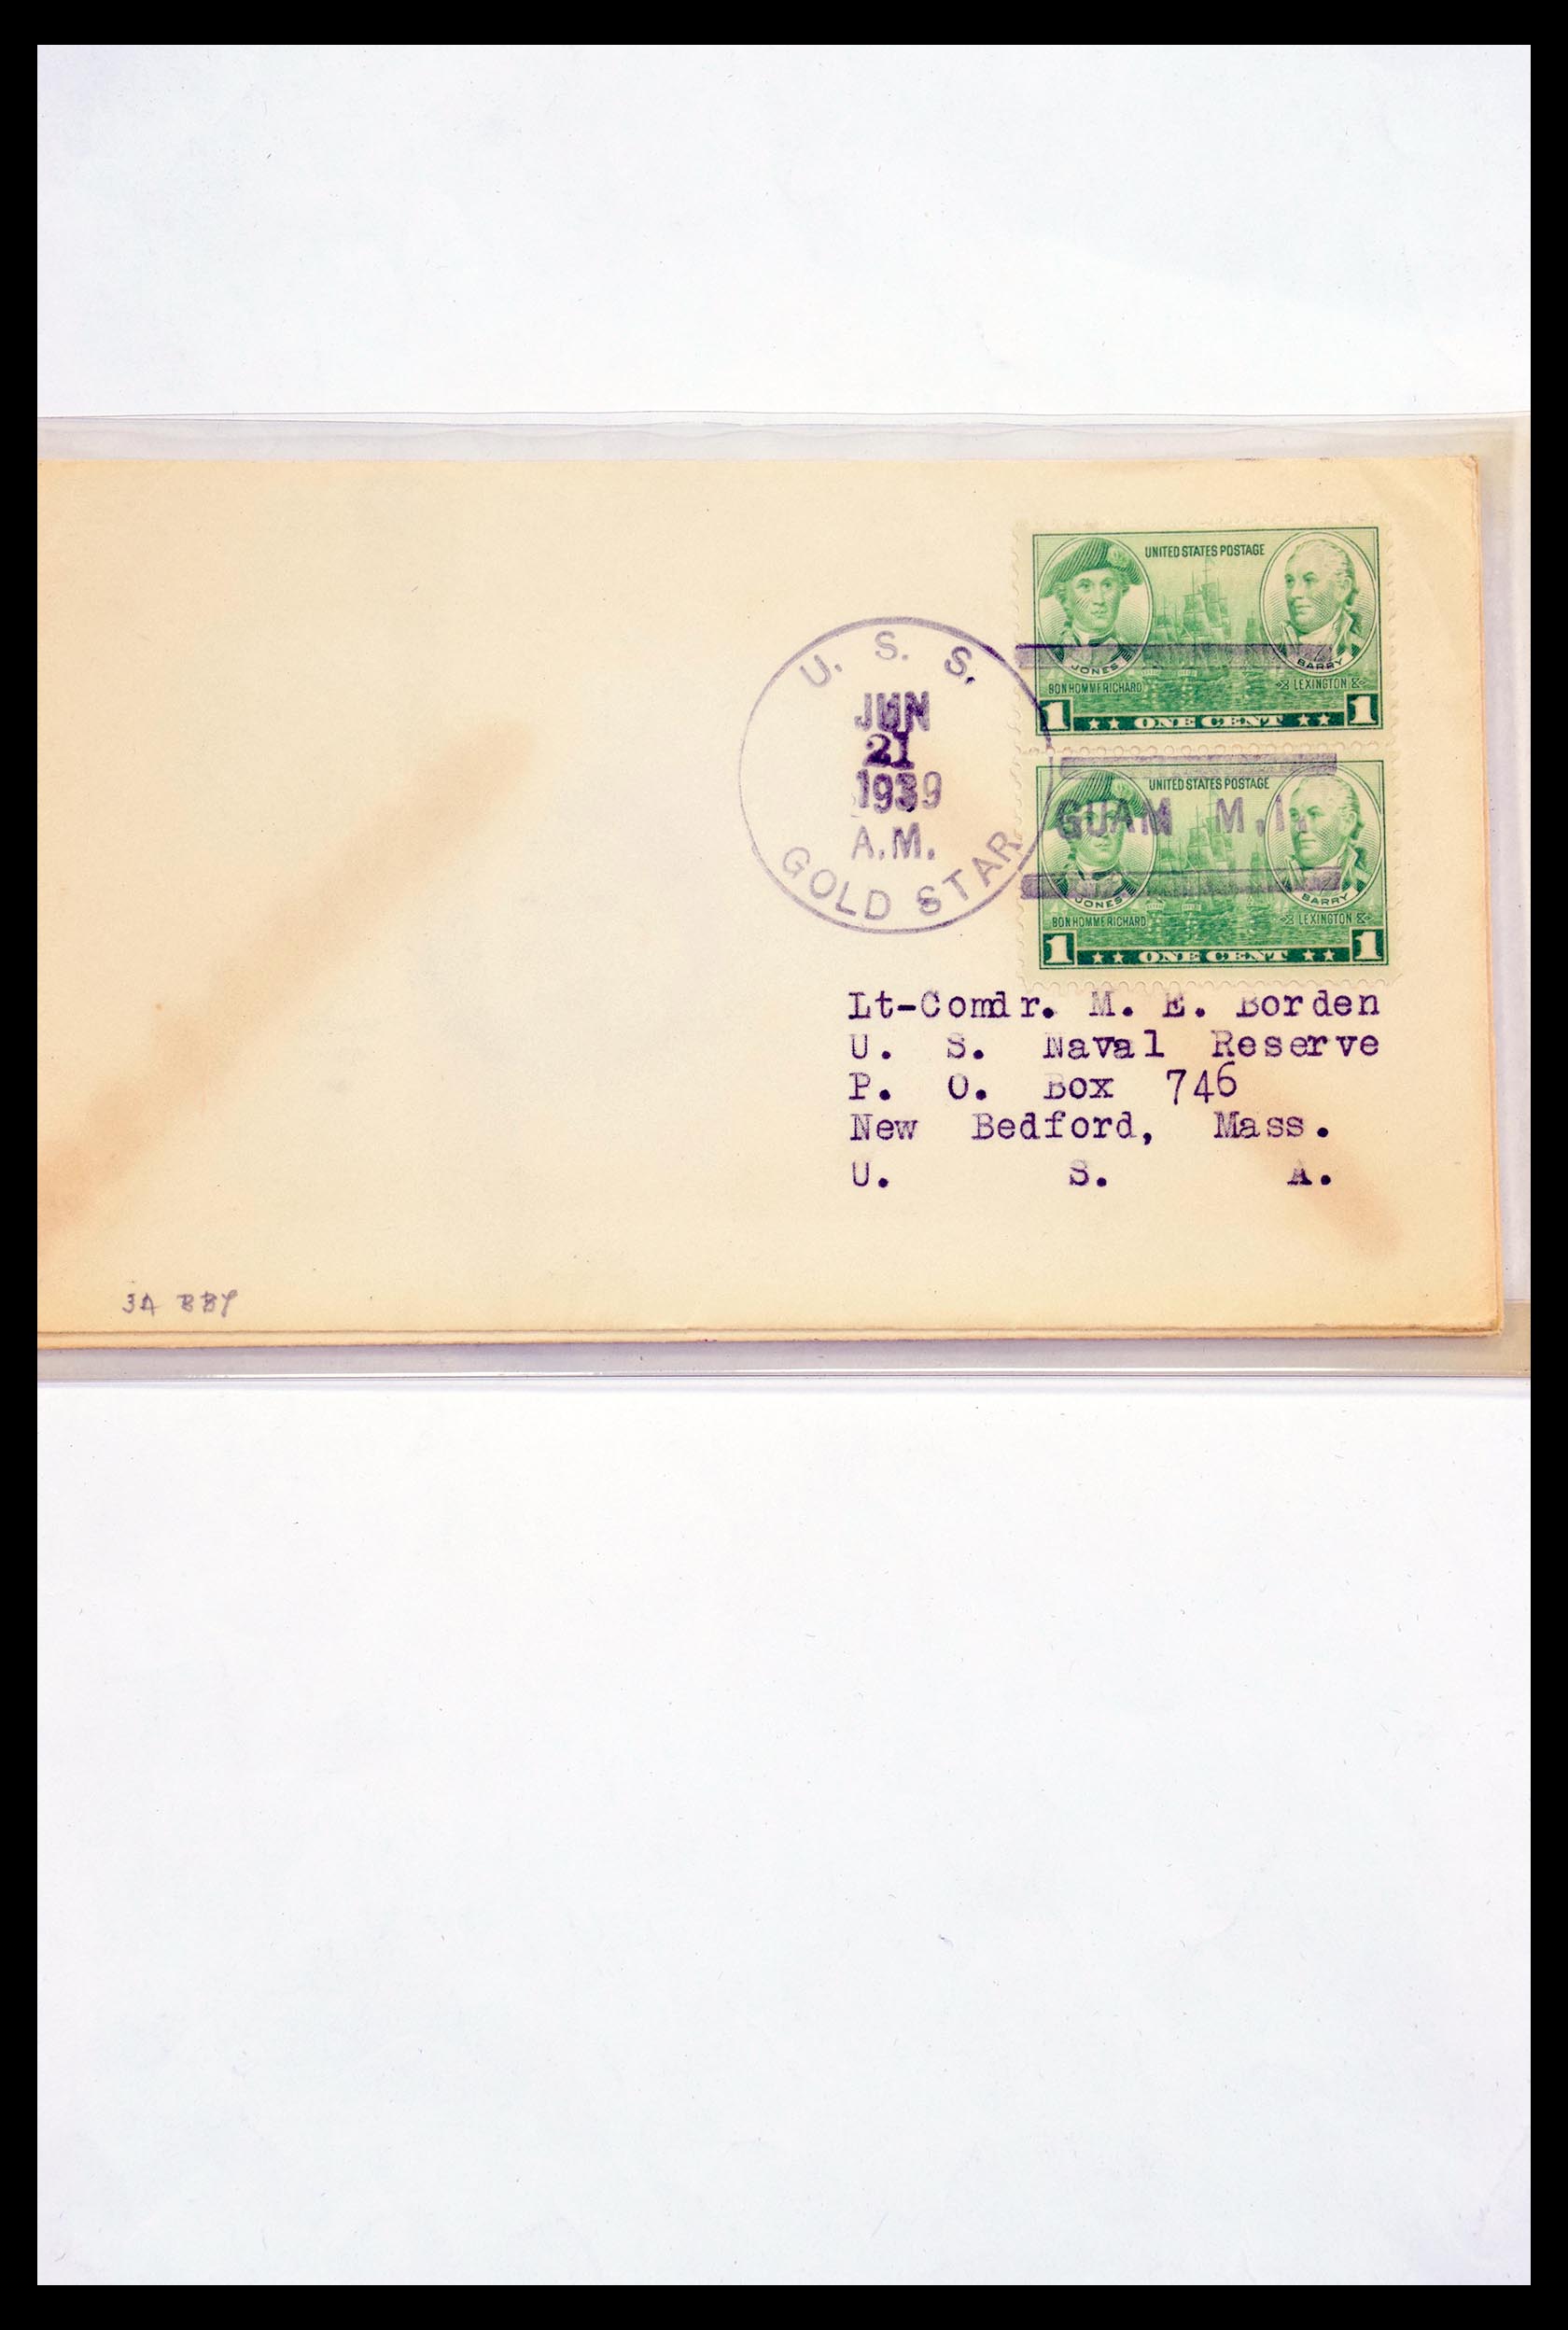 30341 302 - 30341 USA naval cover collection 1930-1970.